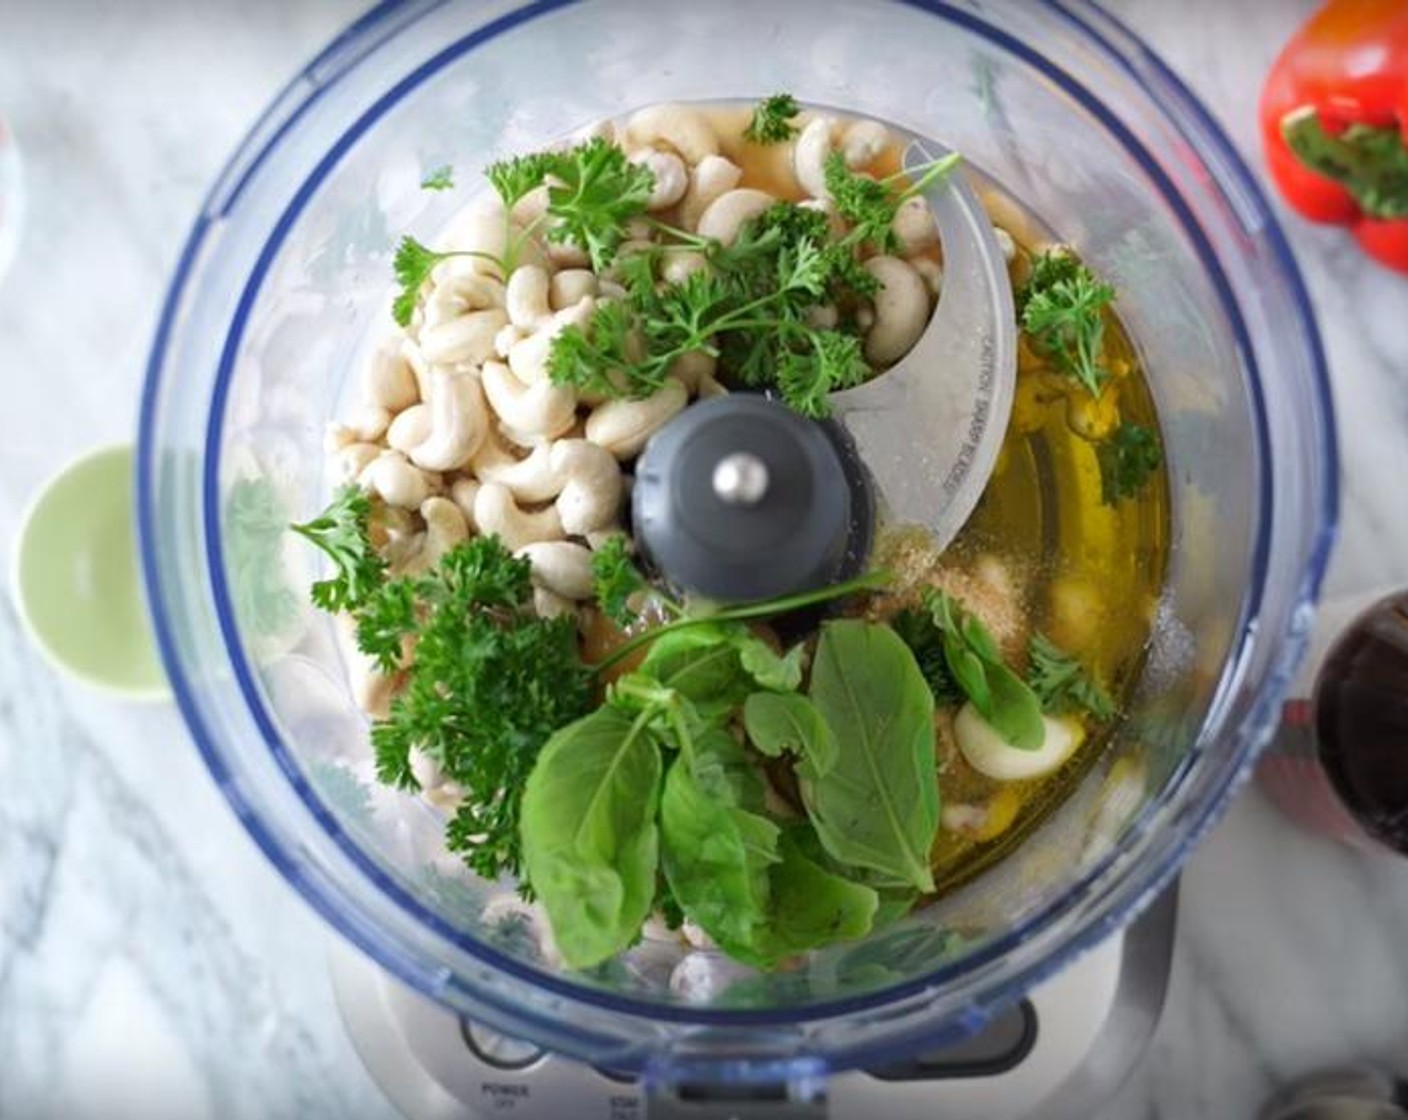 step 1 Combine Raw Cashews (1 1/2 cups), the juice from Lemon (1), Apple Cider Vinegar (1/3 cup), Extra-Virgin Olive Oil (1/3 cup), Honey (2 Tbsp), Onion Powder (1 Tbsp), Garlic (2 cloves), Fresh Basil (1/4 cup), and Fresh Parsley (1/4 cup) in a blender.